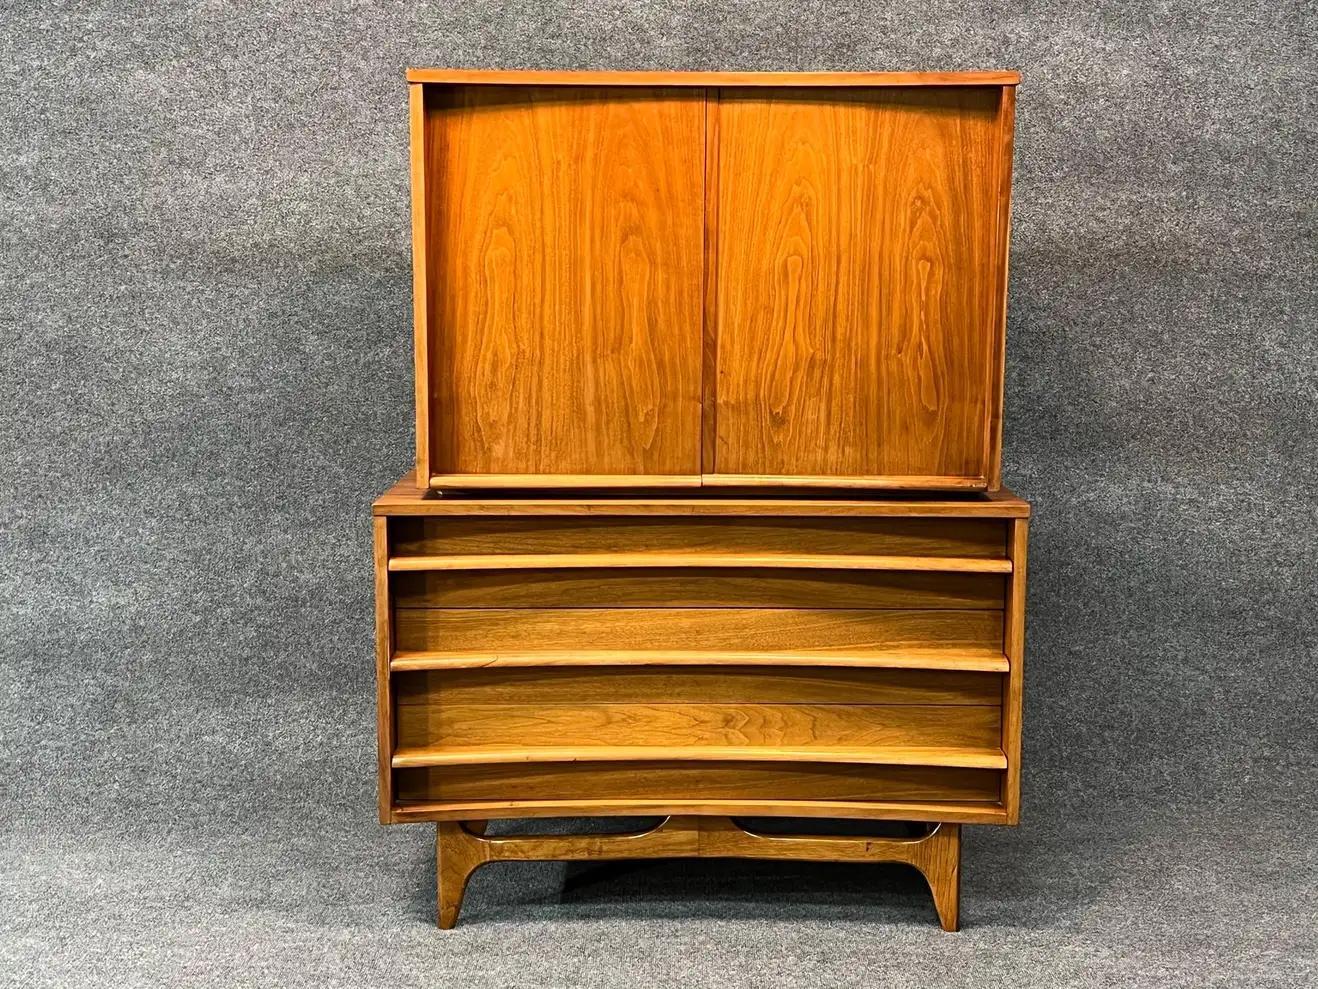 This listing is for a mid-century Young Manufacturing walnut dresser. Featuring a graciously curved front design, nine drawers for storage, and a beautiful walnut finish. An extraordinary design to complete your bedroom as a dresser or living room